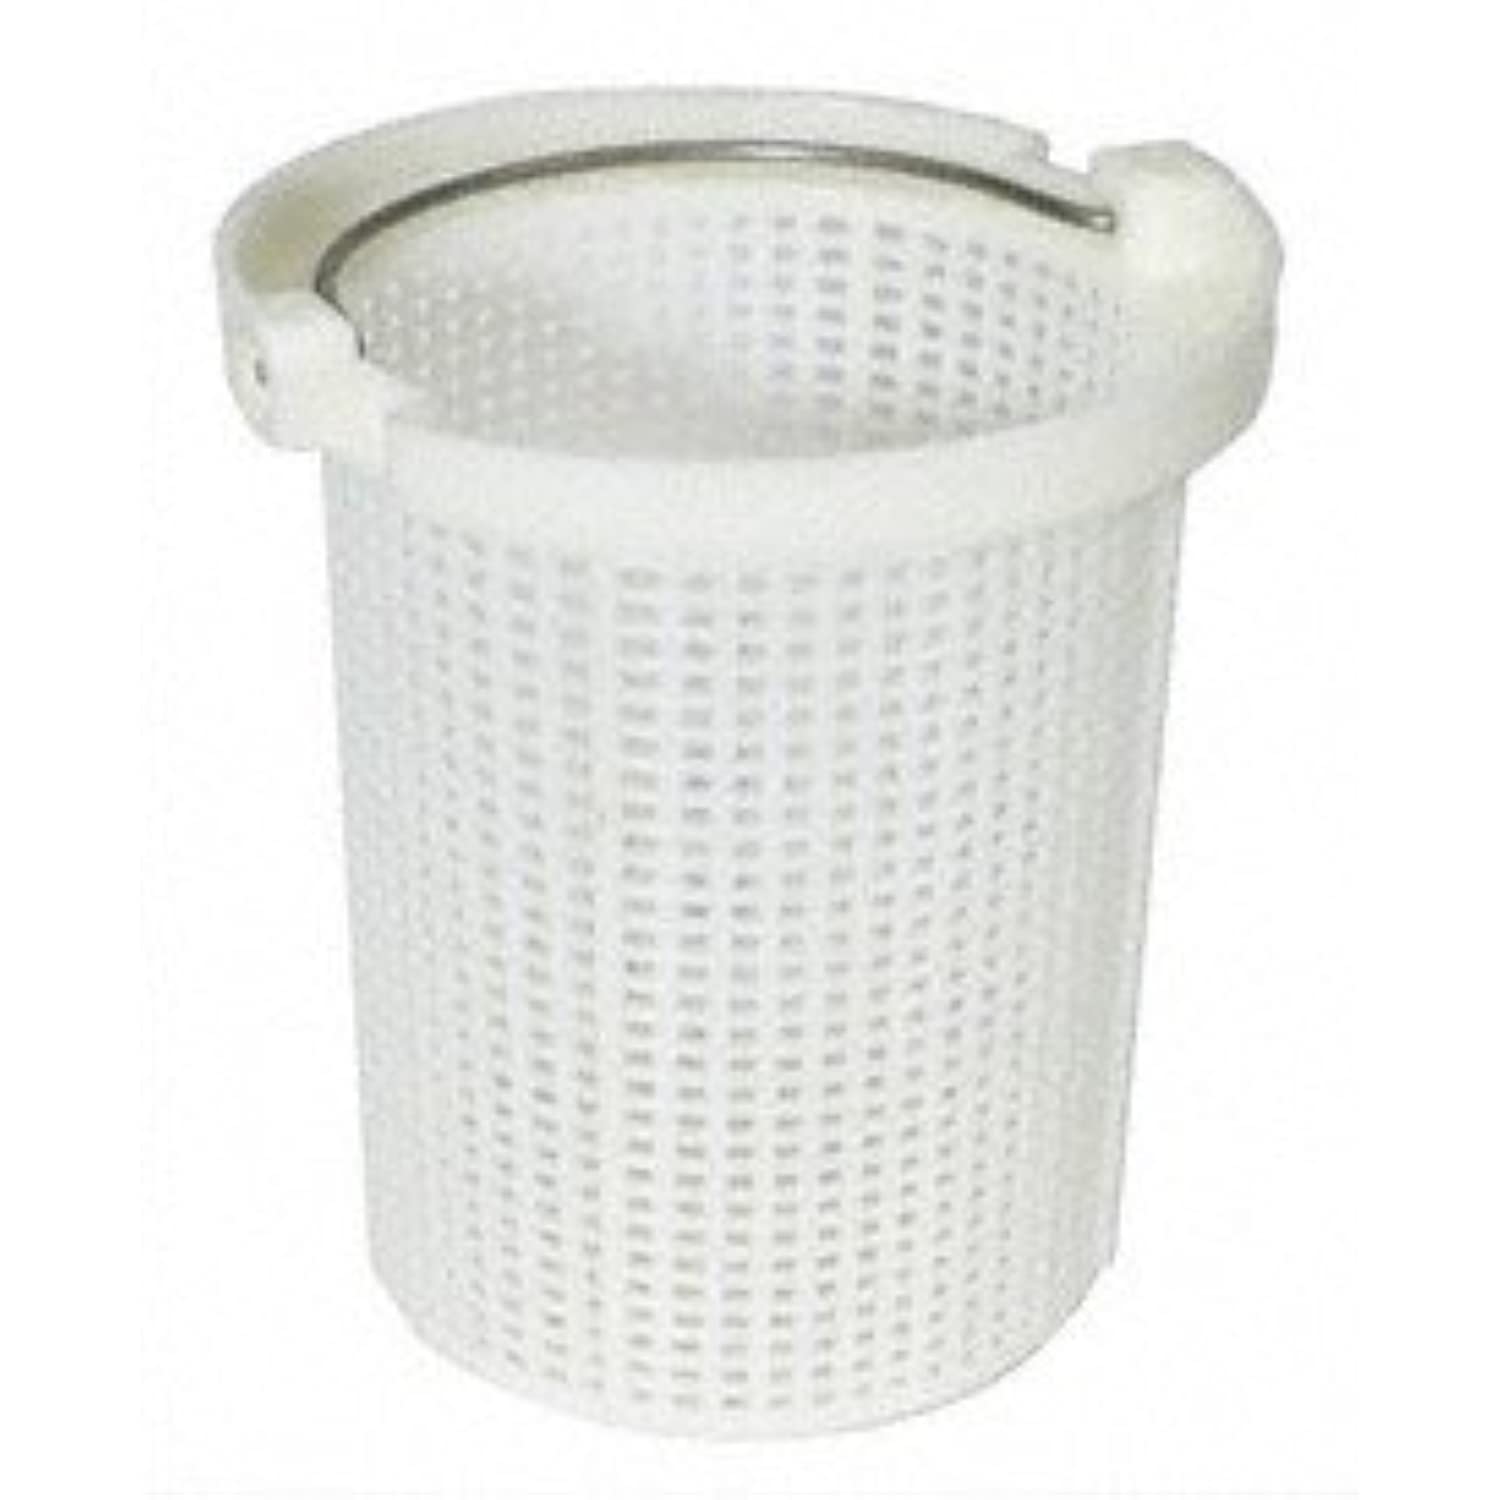 Home & Garden > Kitchen Dining & Bar > Kitchen Tools & Gadgets > Colanders Strainers & Sifters